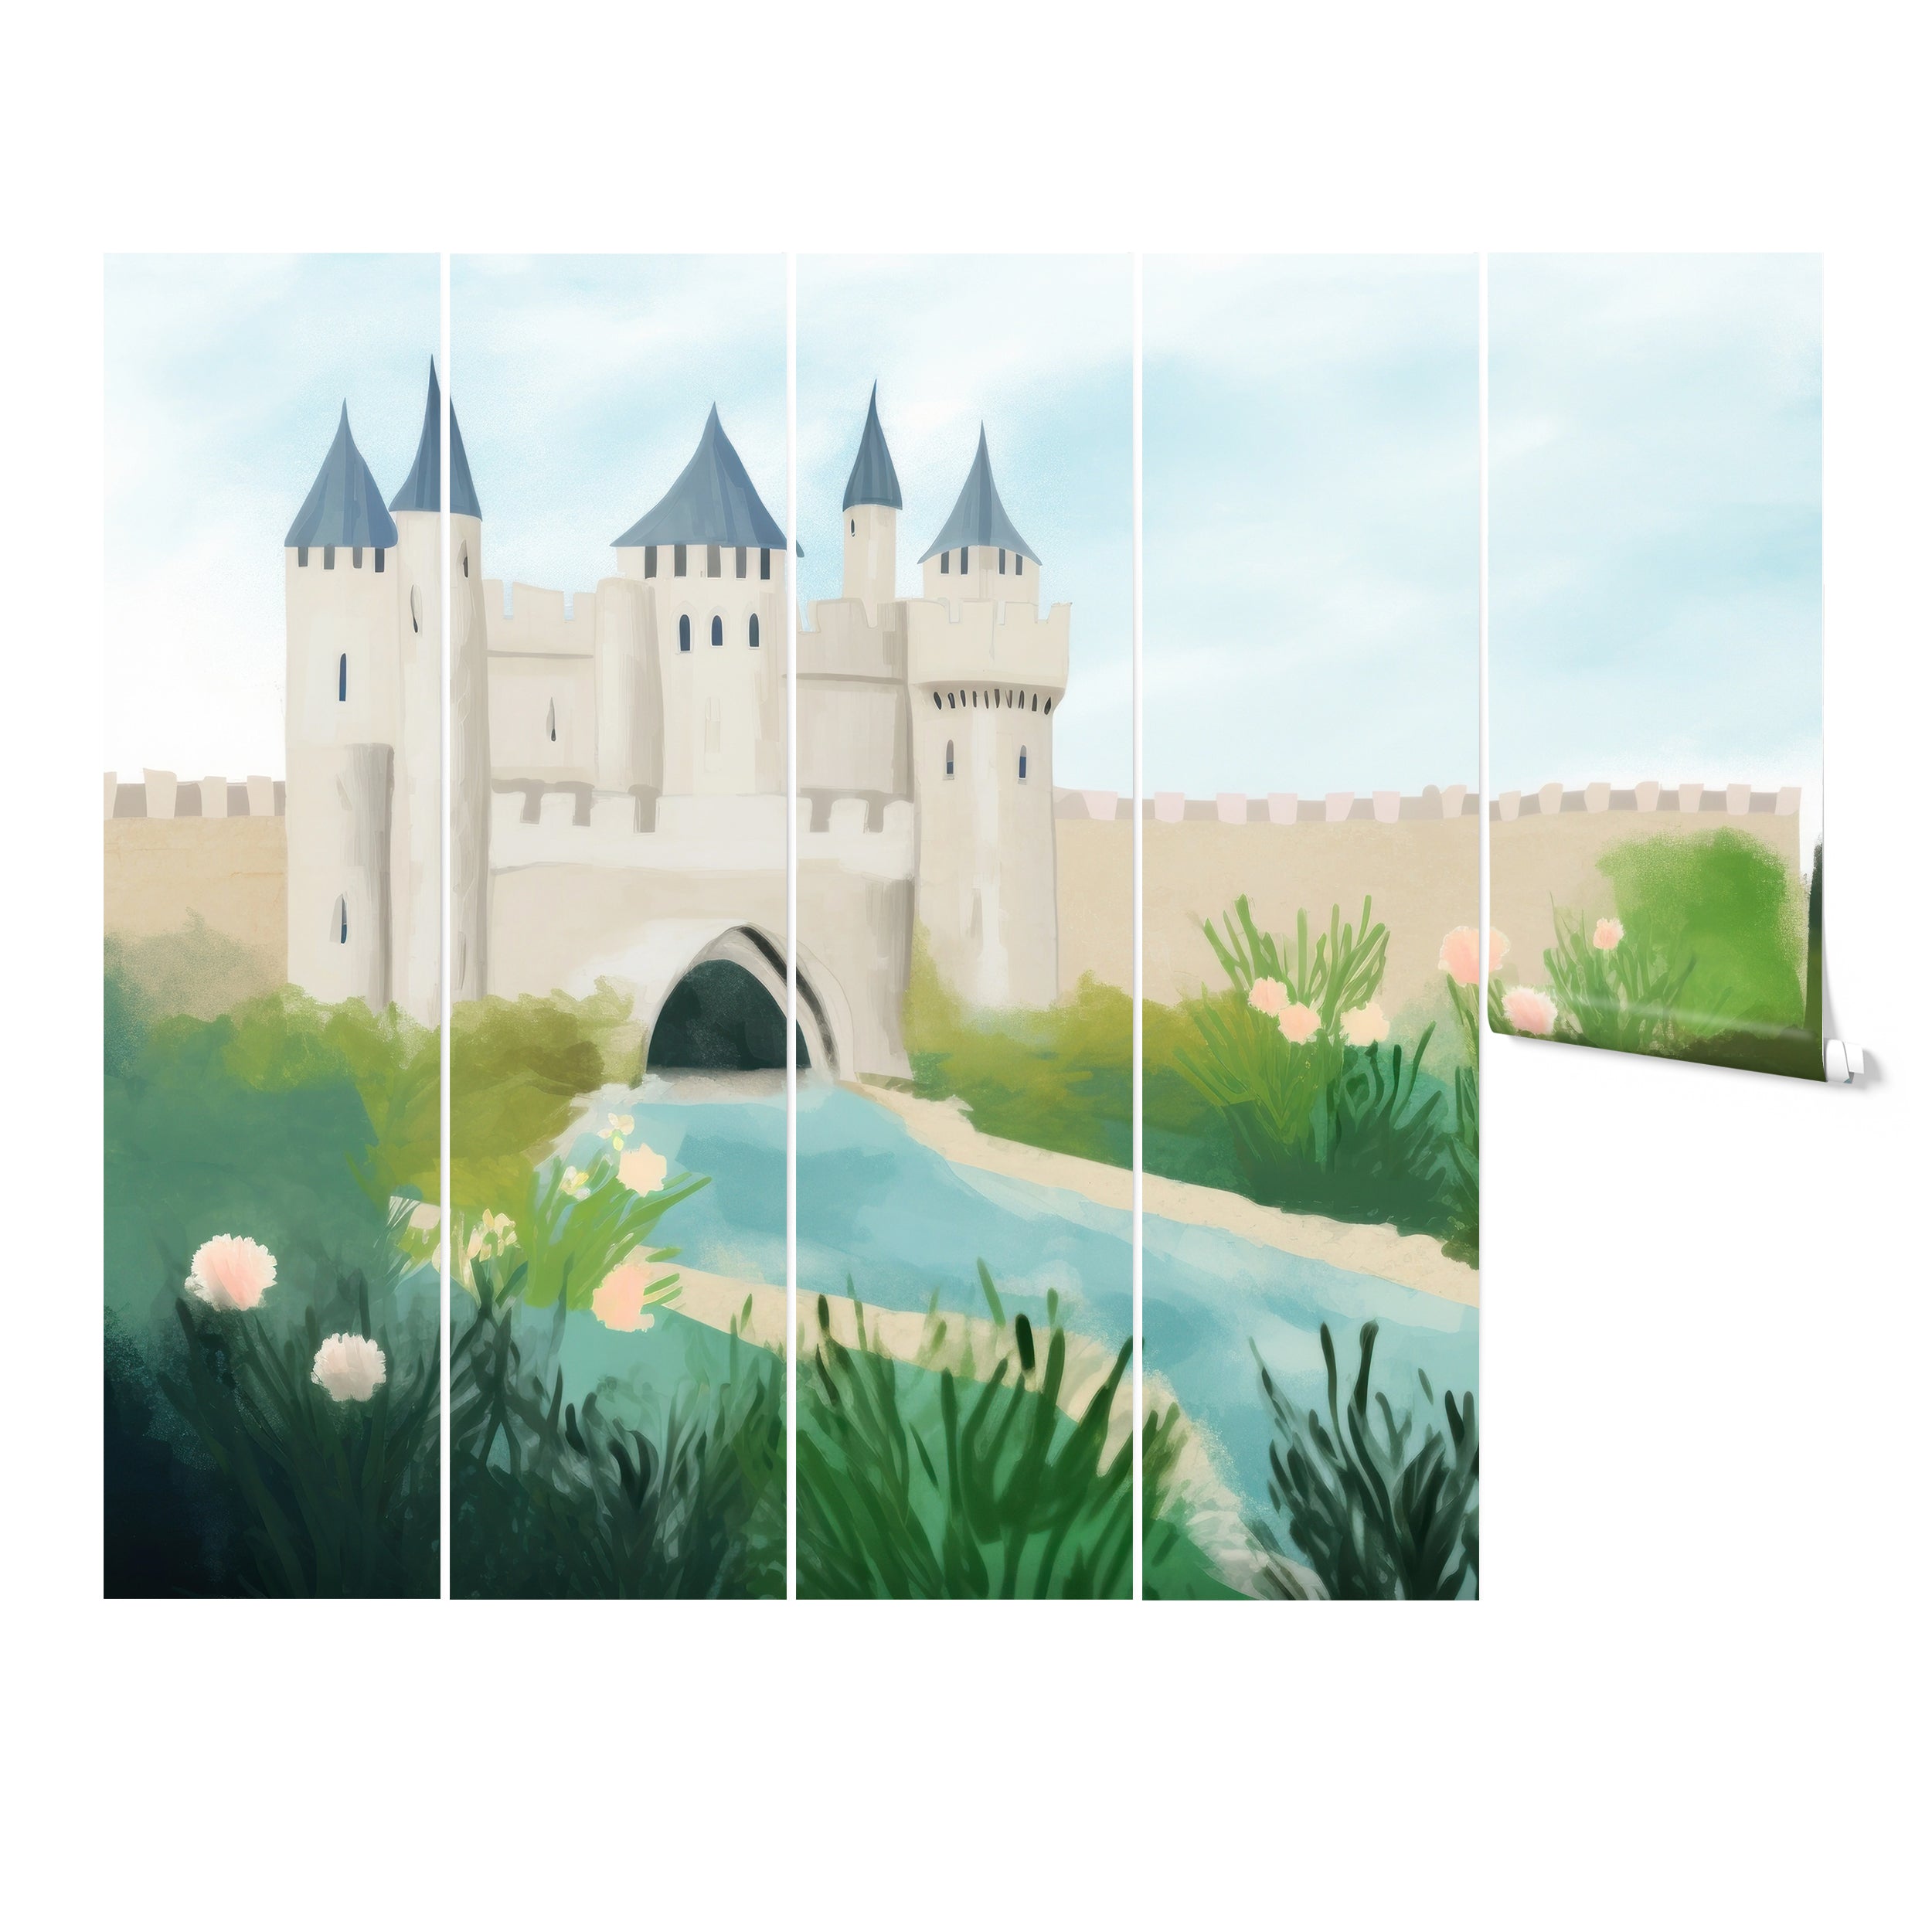 A wallpaper mural divided into multiple panels, showcasing a majestic castle with blue-topped turrets. The castle is set against a backdrop of vibrant greenery and delicate pink flowers, with a tranquil river flowing in the foreground.